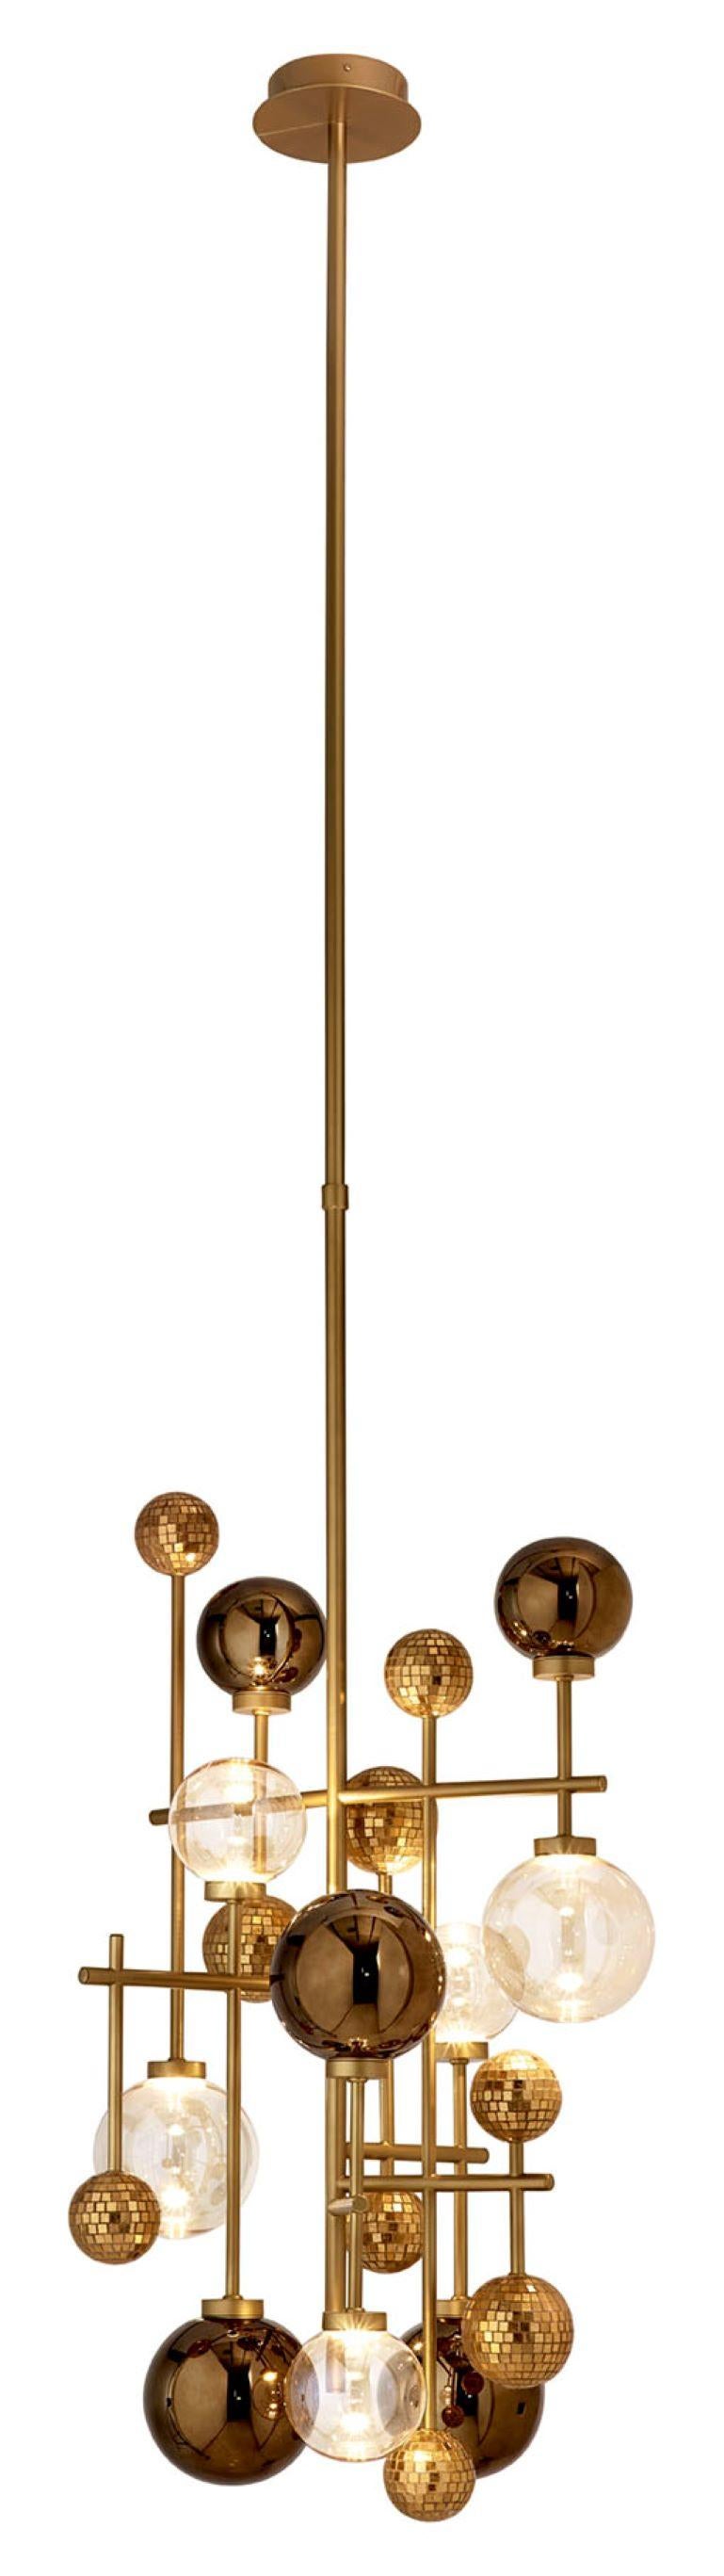 Ceiling Lamp Brass Frame Nickel or Brass Finish Glass Spheres Artistic Mosaic In New Condition For Sale In London, GB